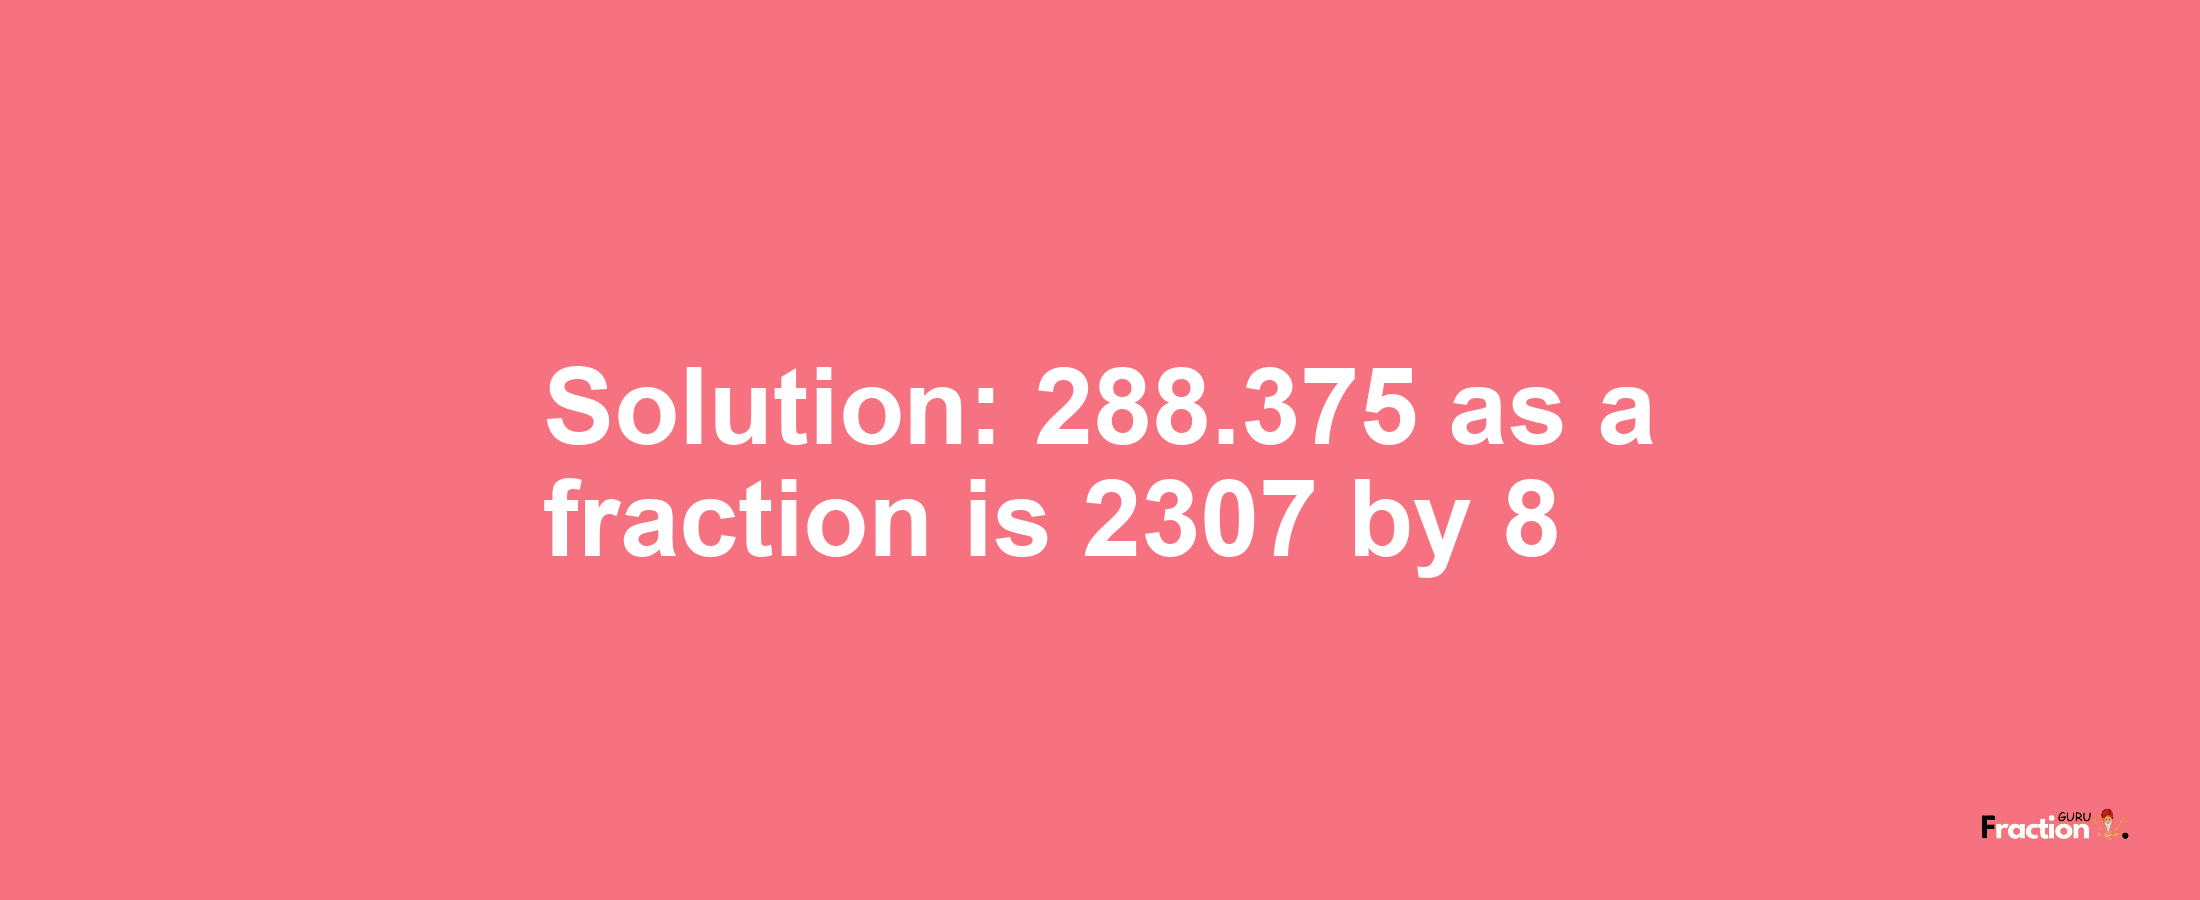 Solution:288.375 as a fraction is 2307/8